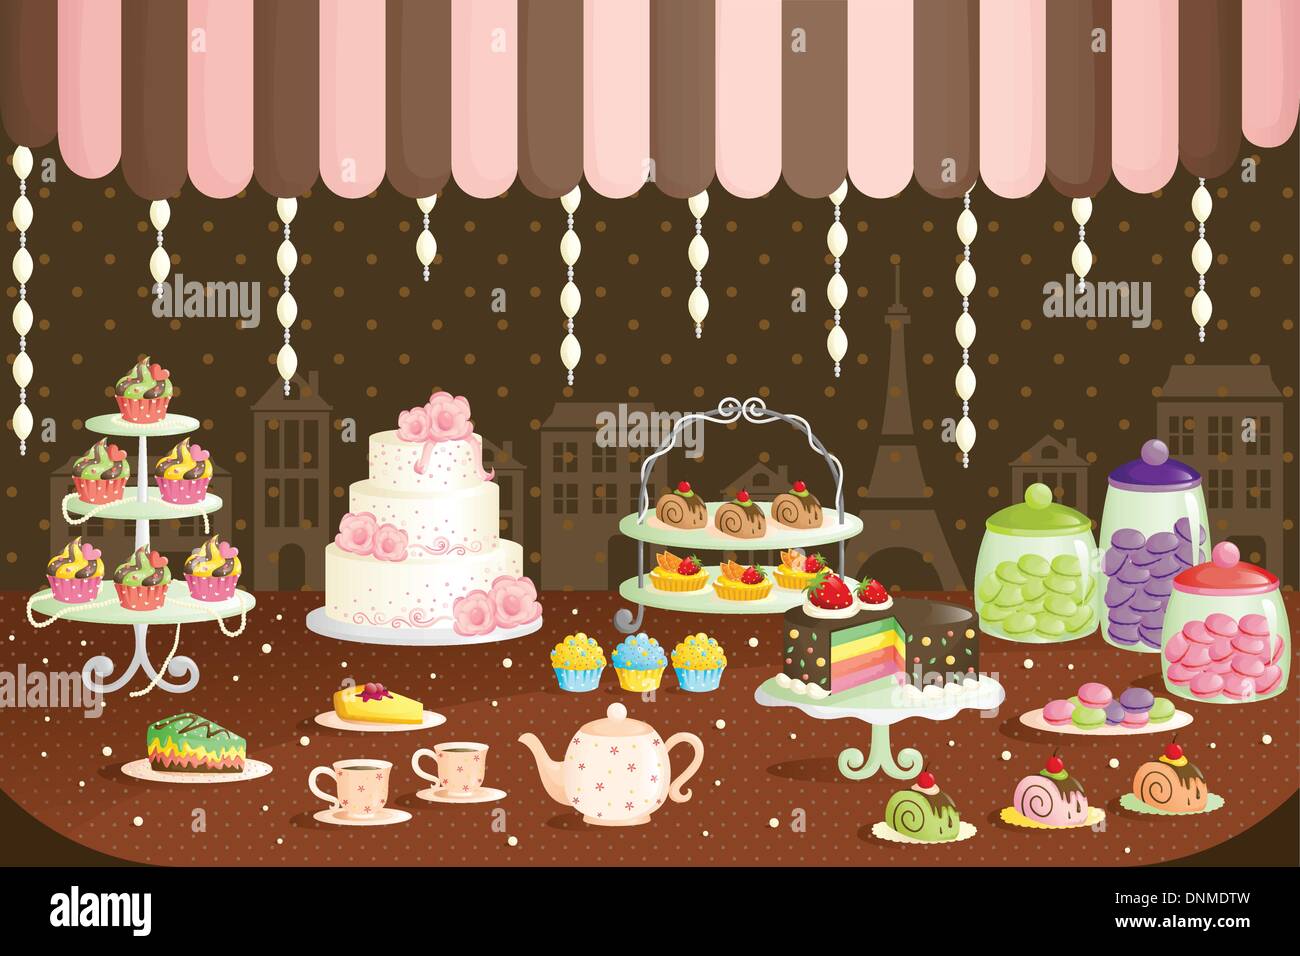 A vector illustration of cakes store display Stock Vector